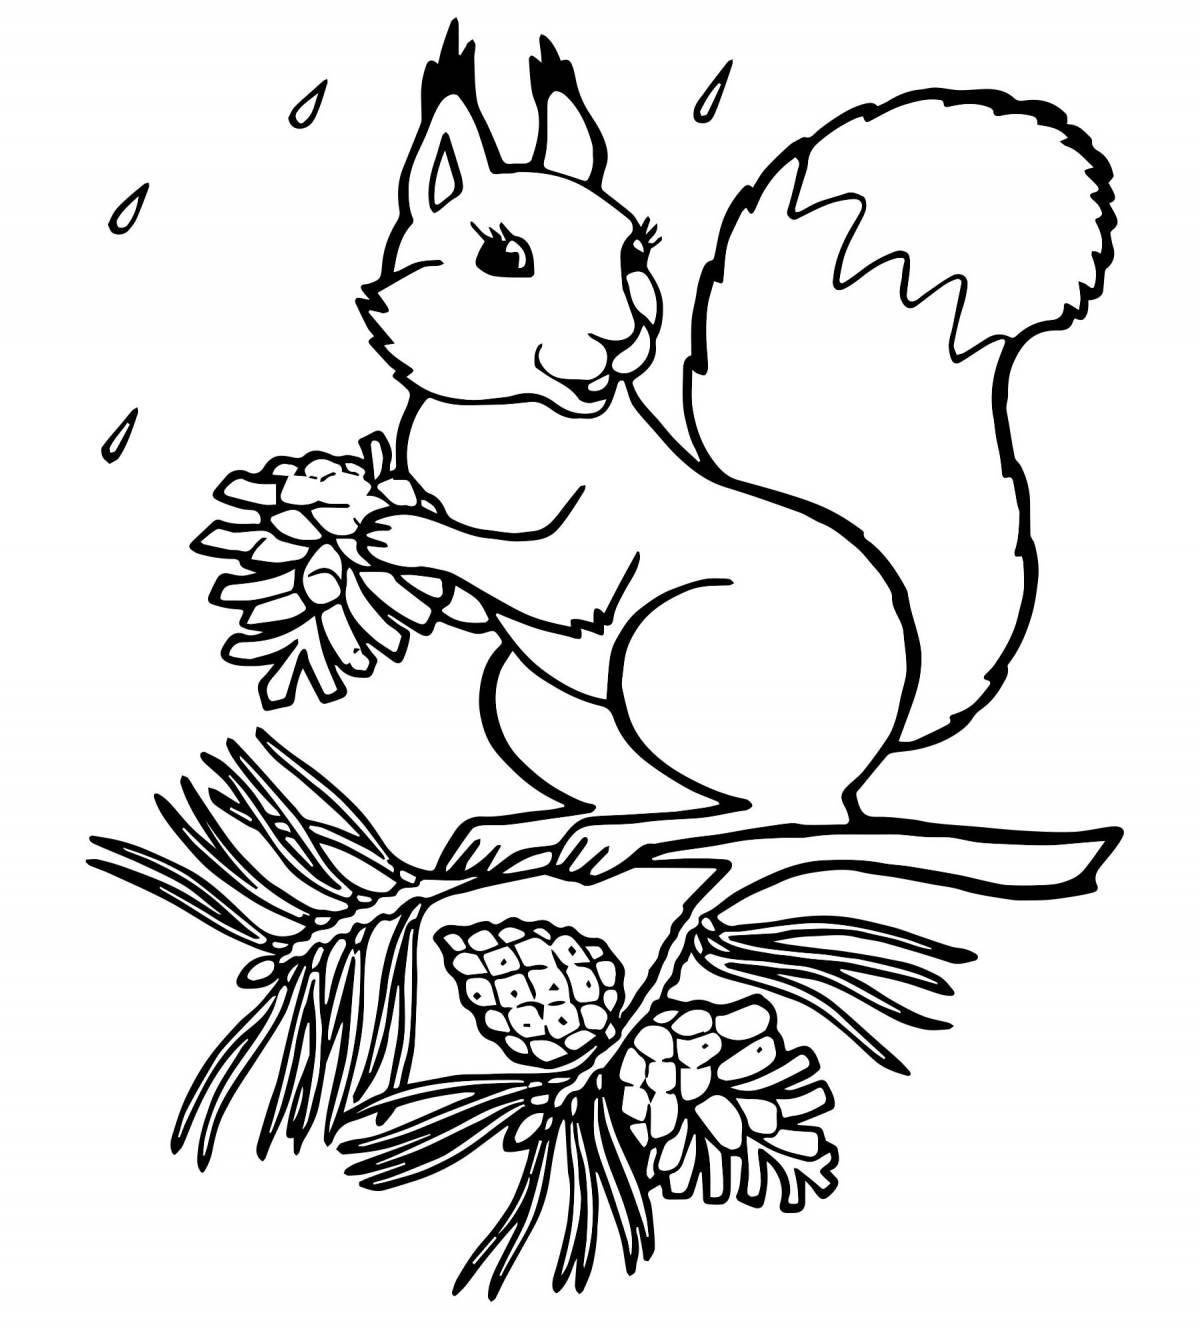 Blessed squirrel coloring page